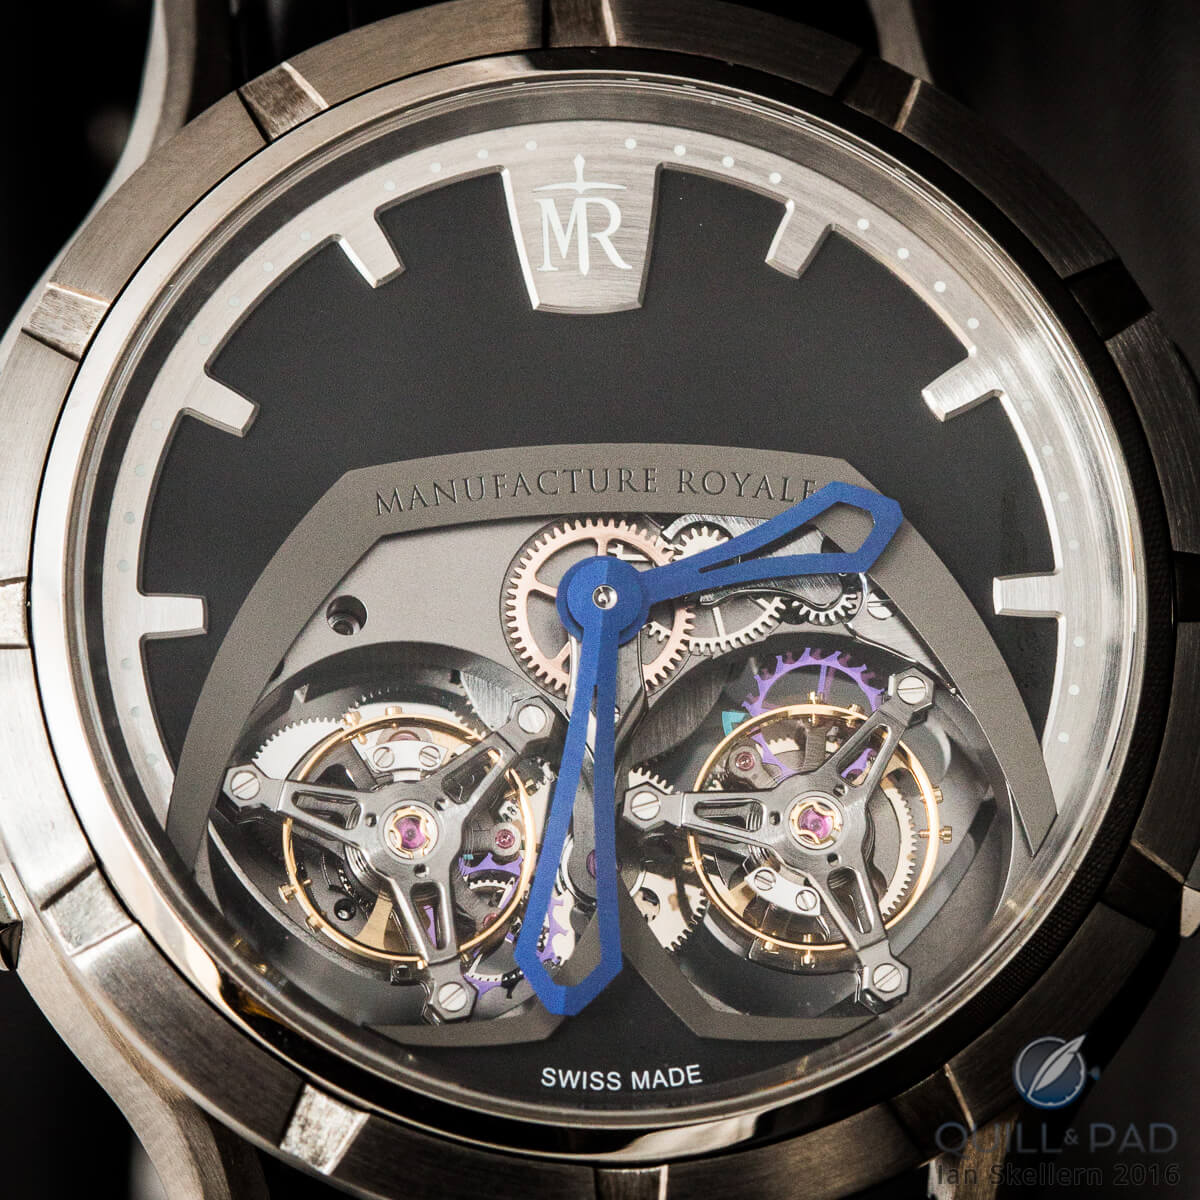 Close up look at the two tourbillons of the Manufacture Royale 1770 Micromégas